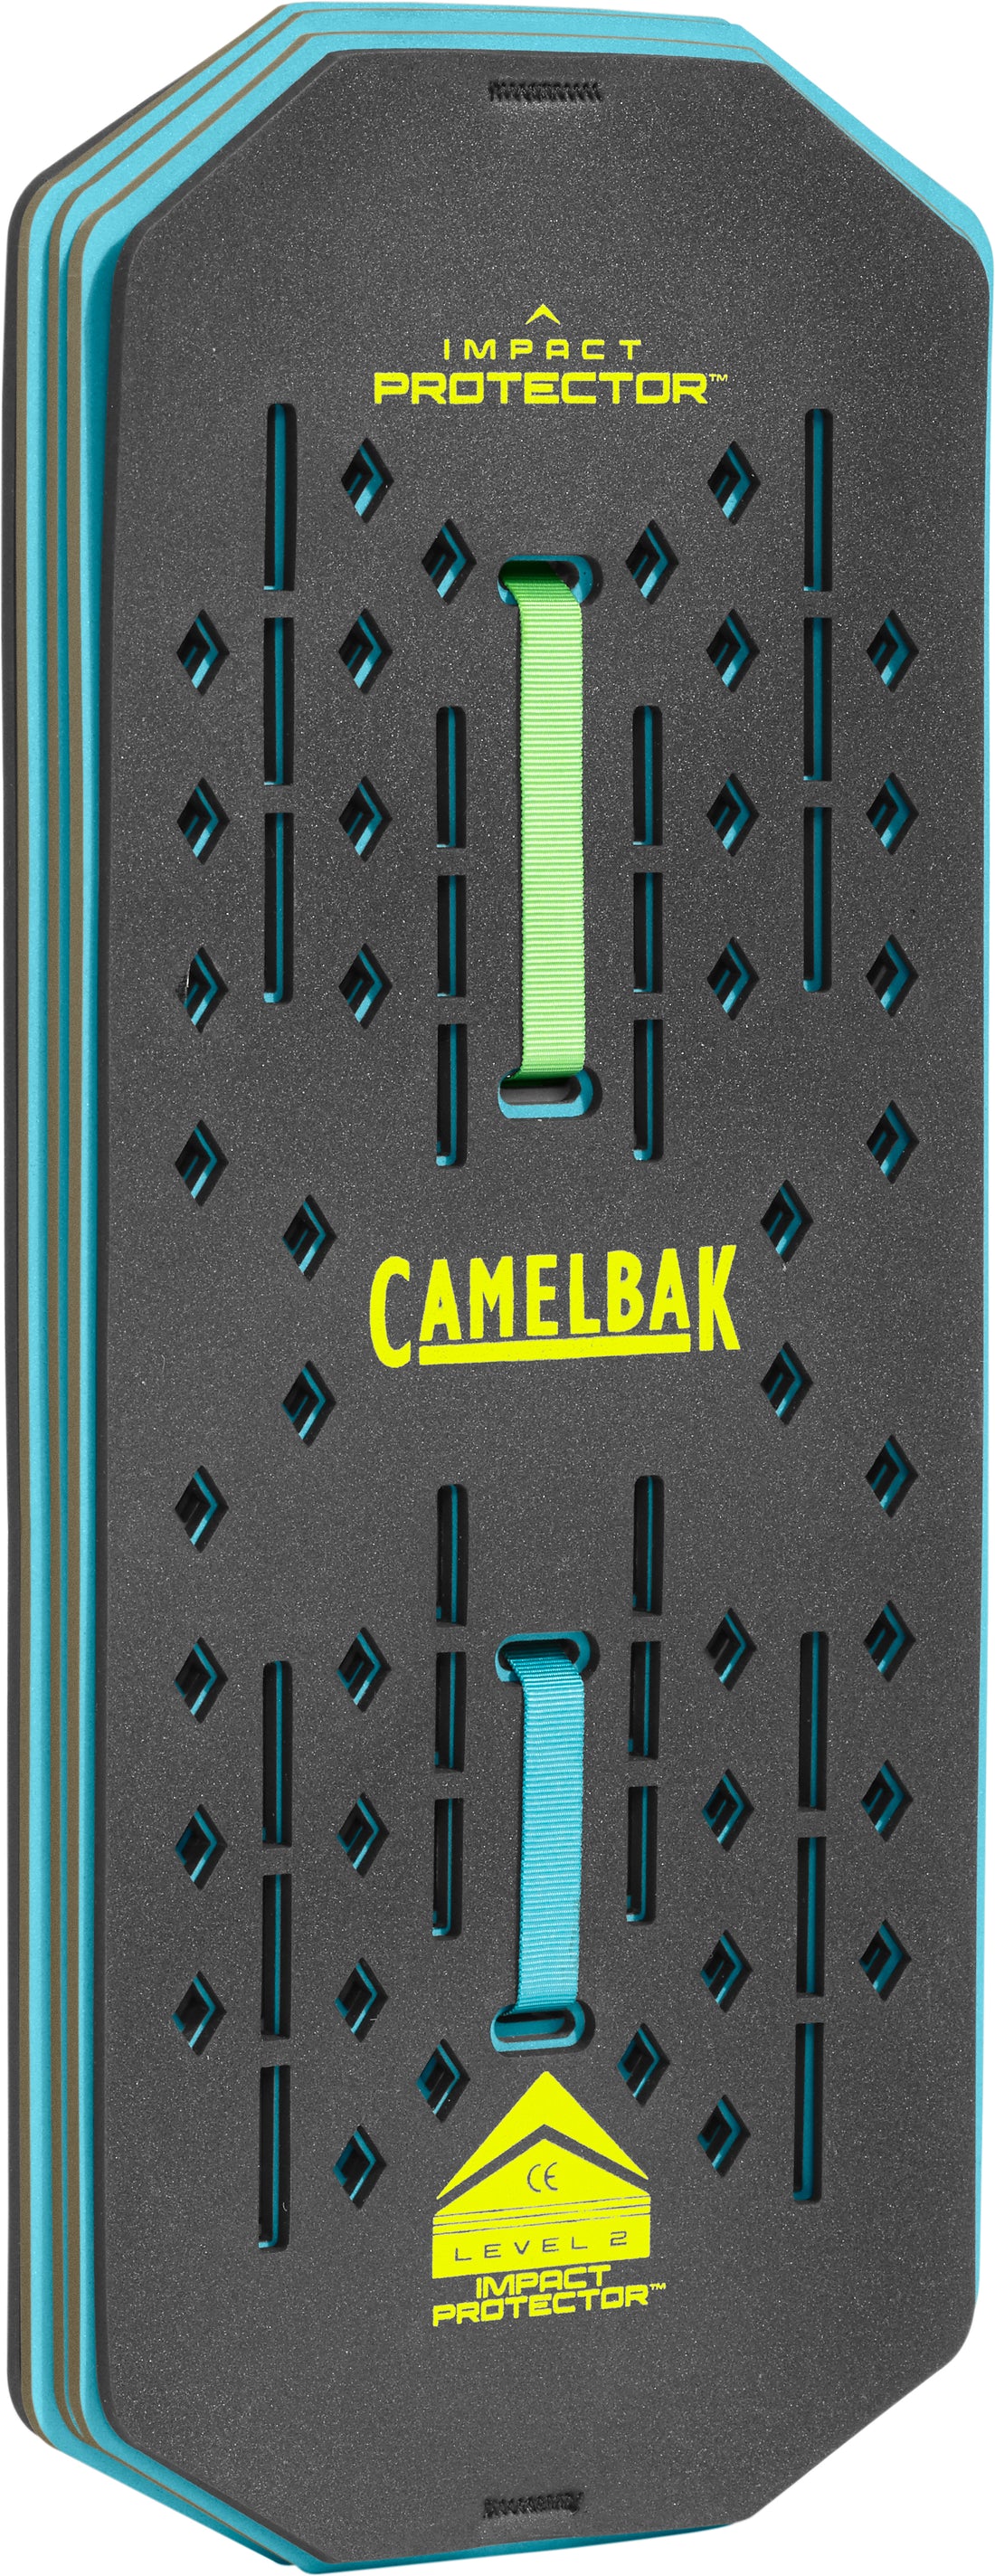 Camelbak|IMPACT_PROTECTOR™|Cycle_LM